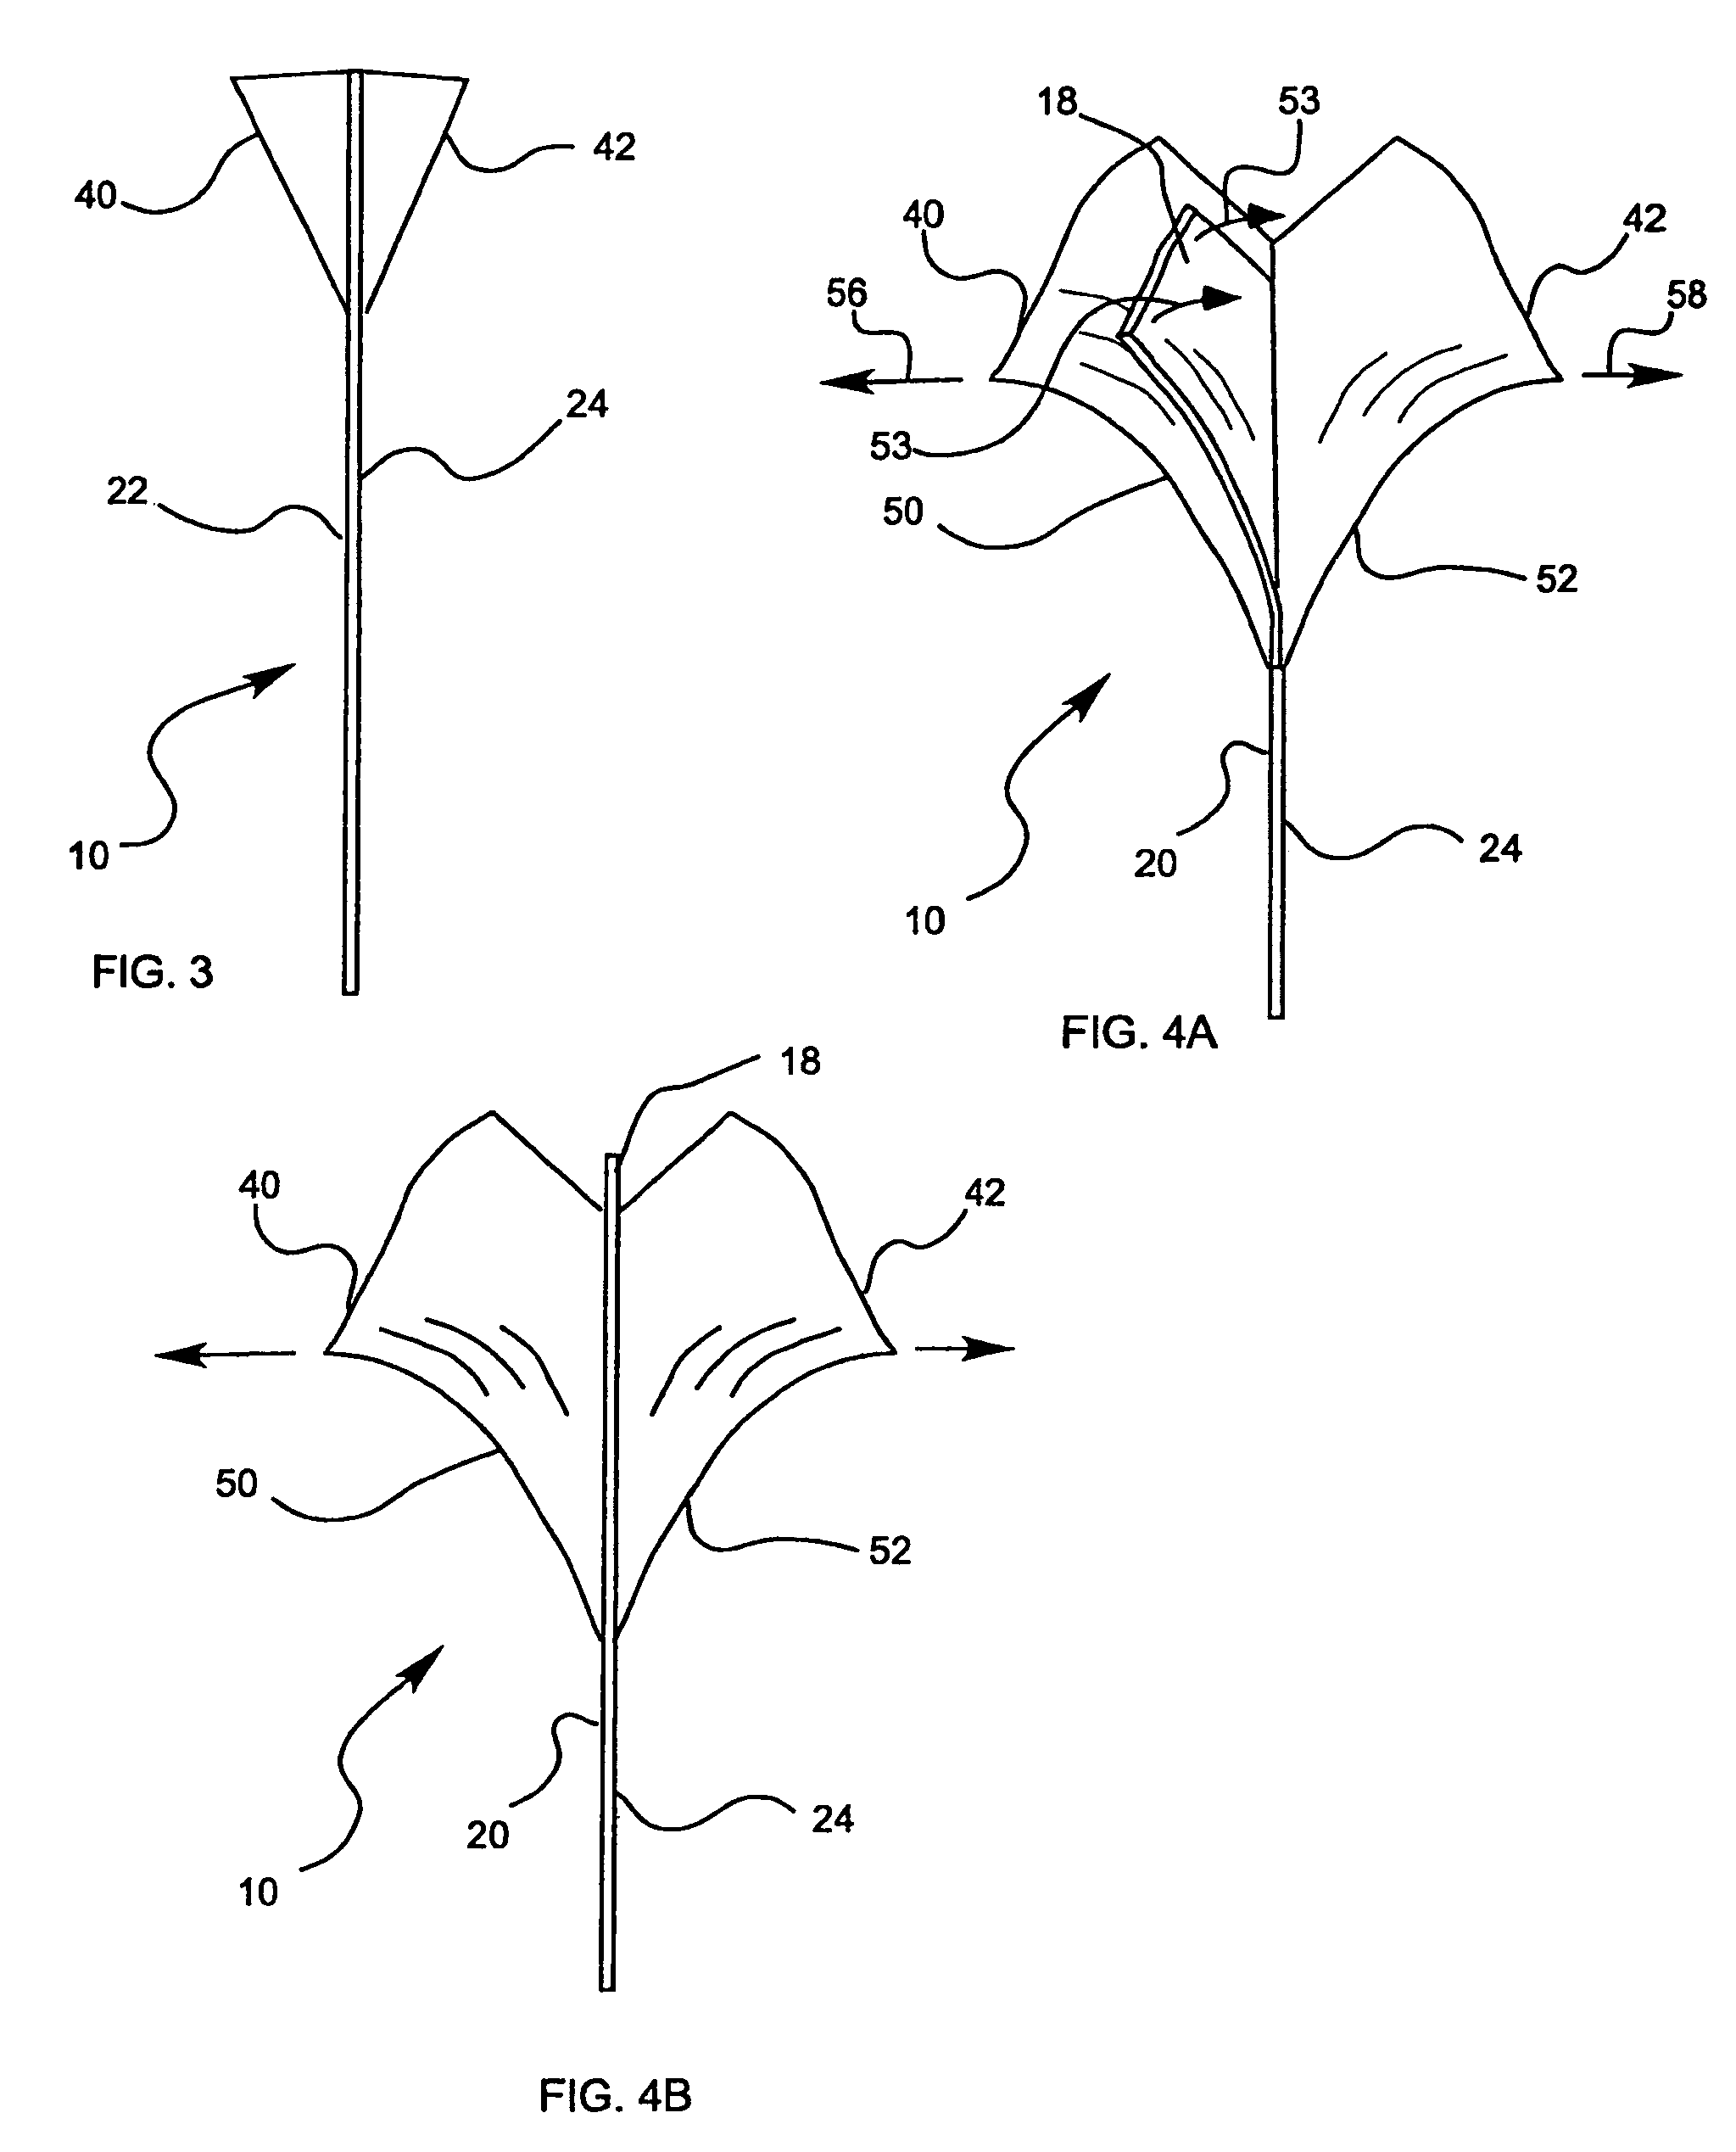 Peelable pouch for transdermal patch and method for packaging